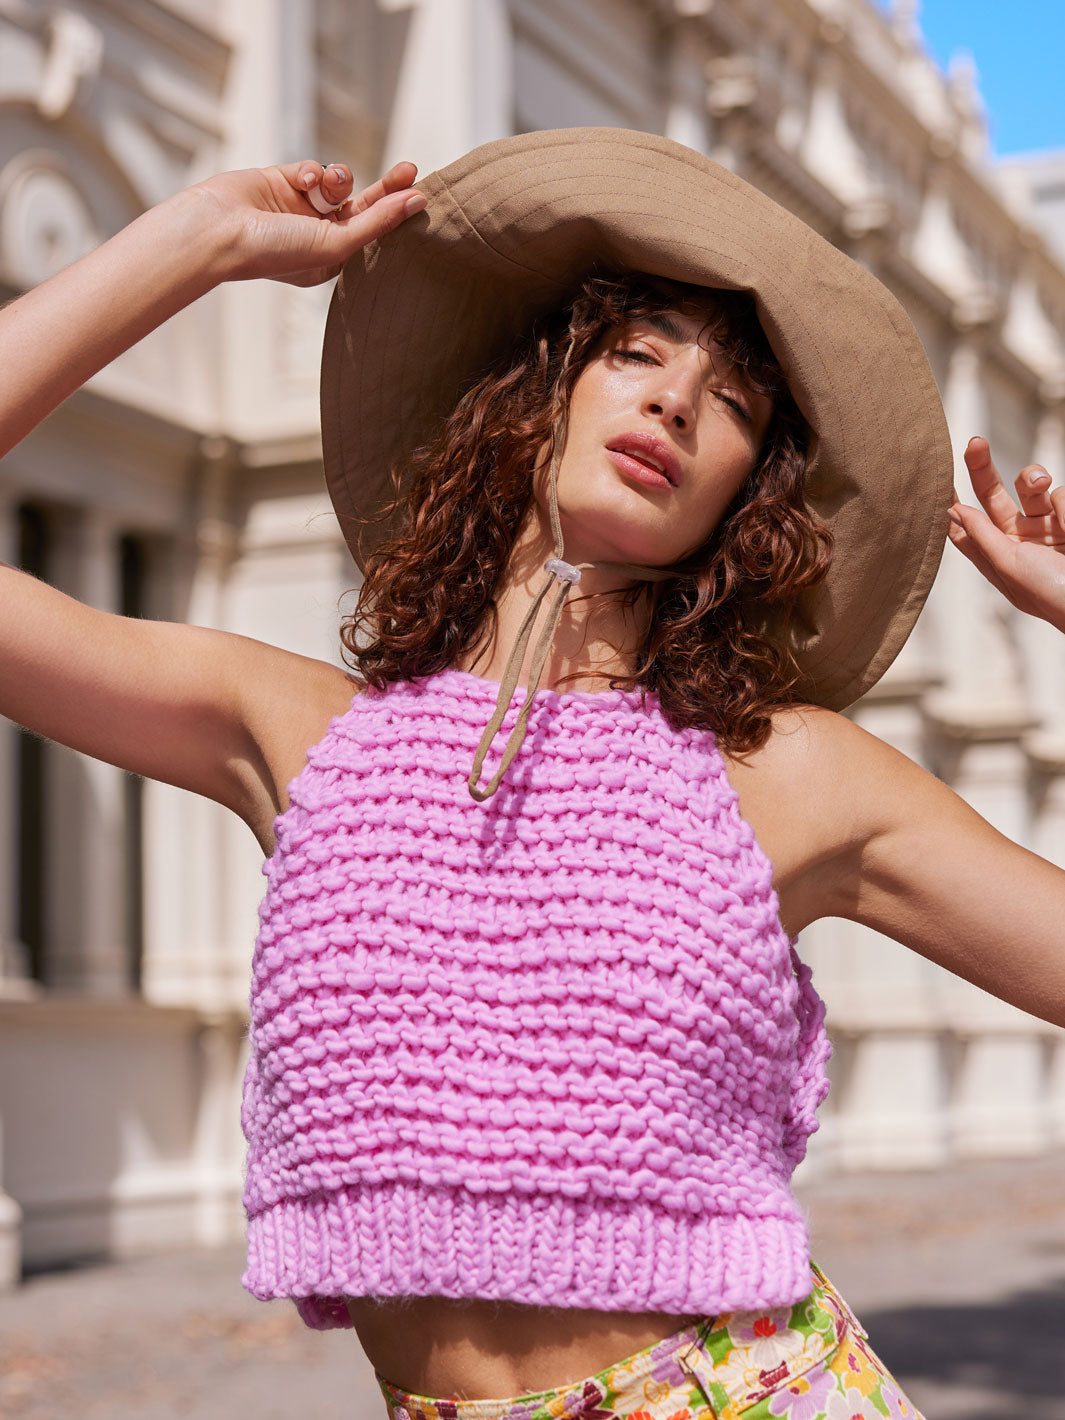 Girl in sun hat wearing a bright pink chunky knit top